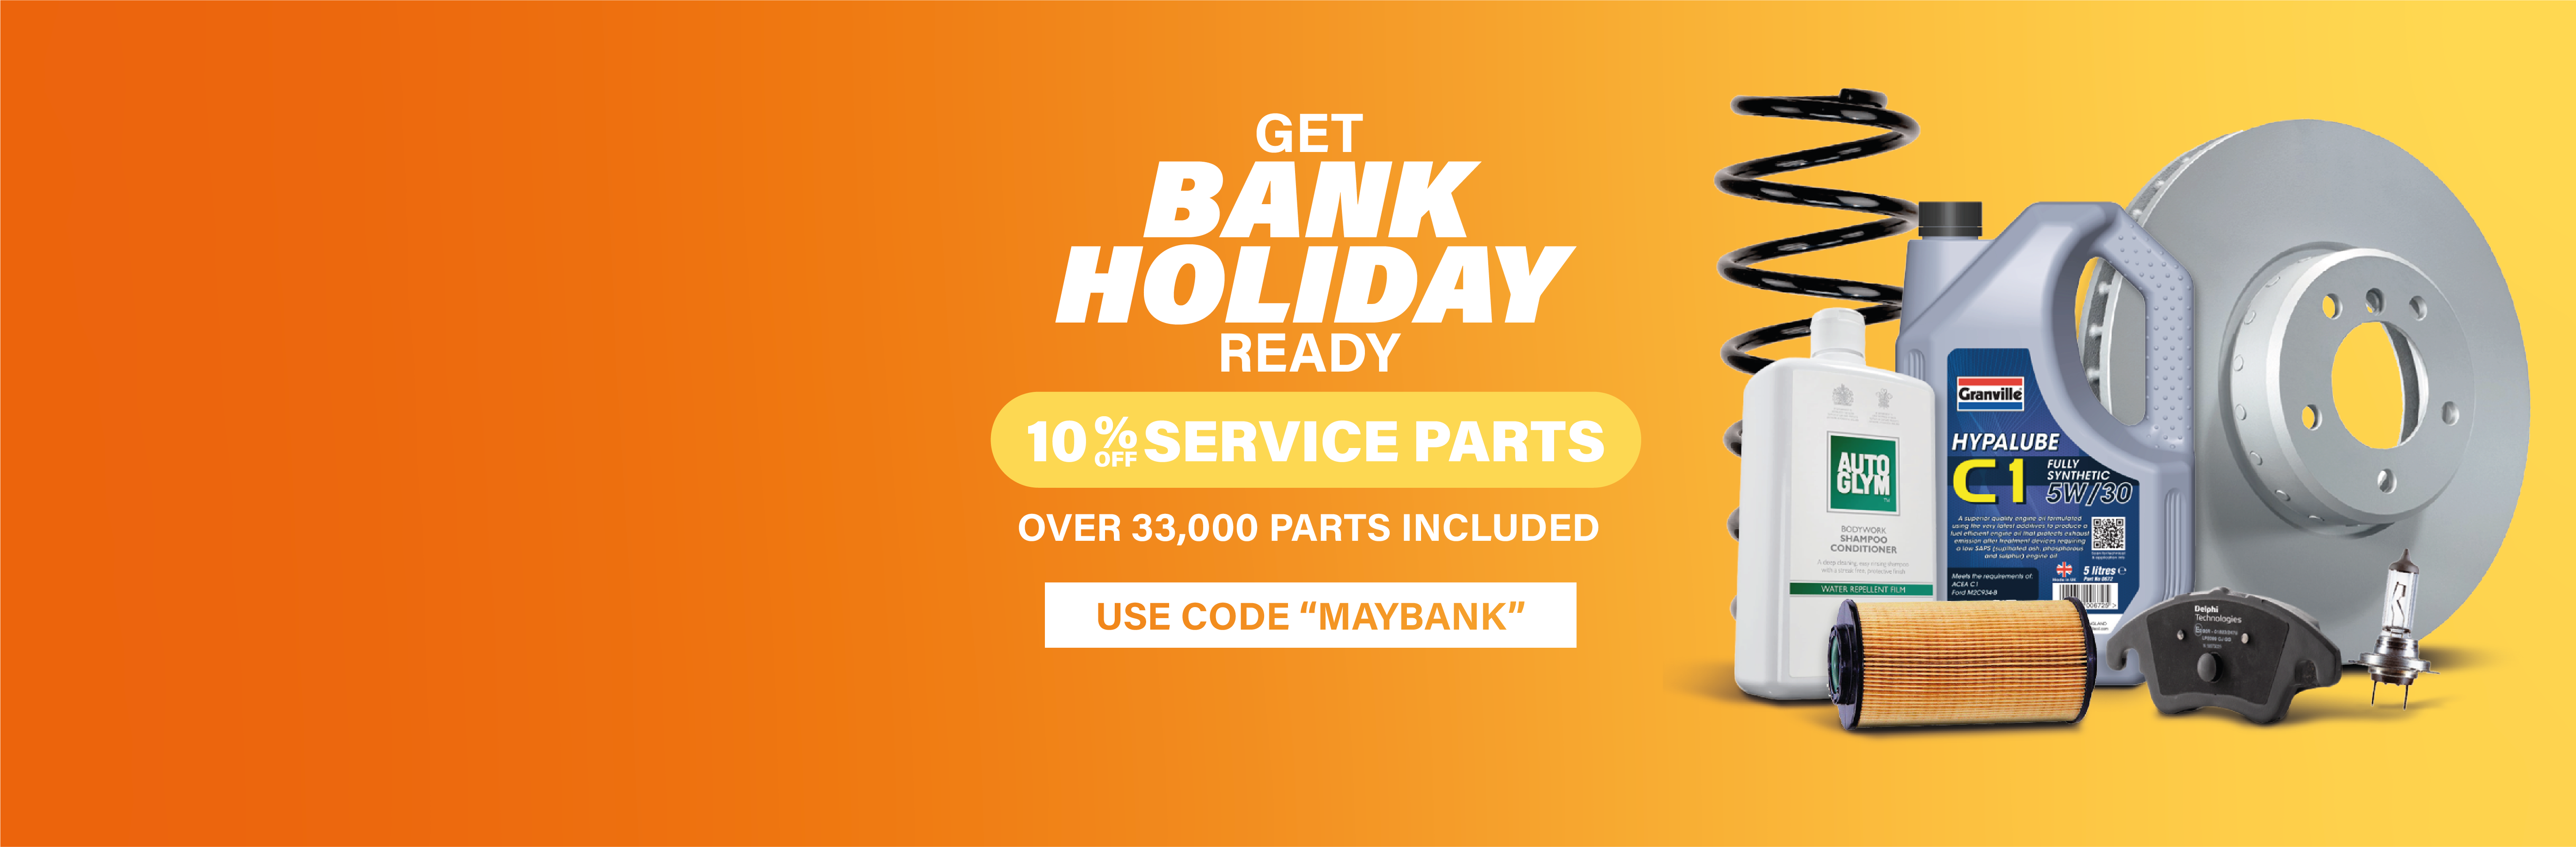 Save 10% on service parts with code MAYBANK